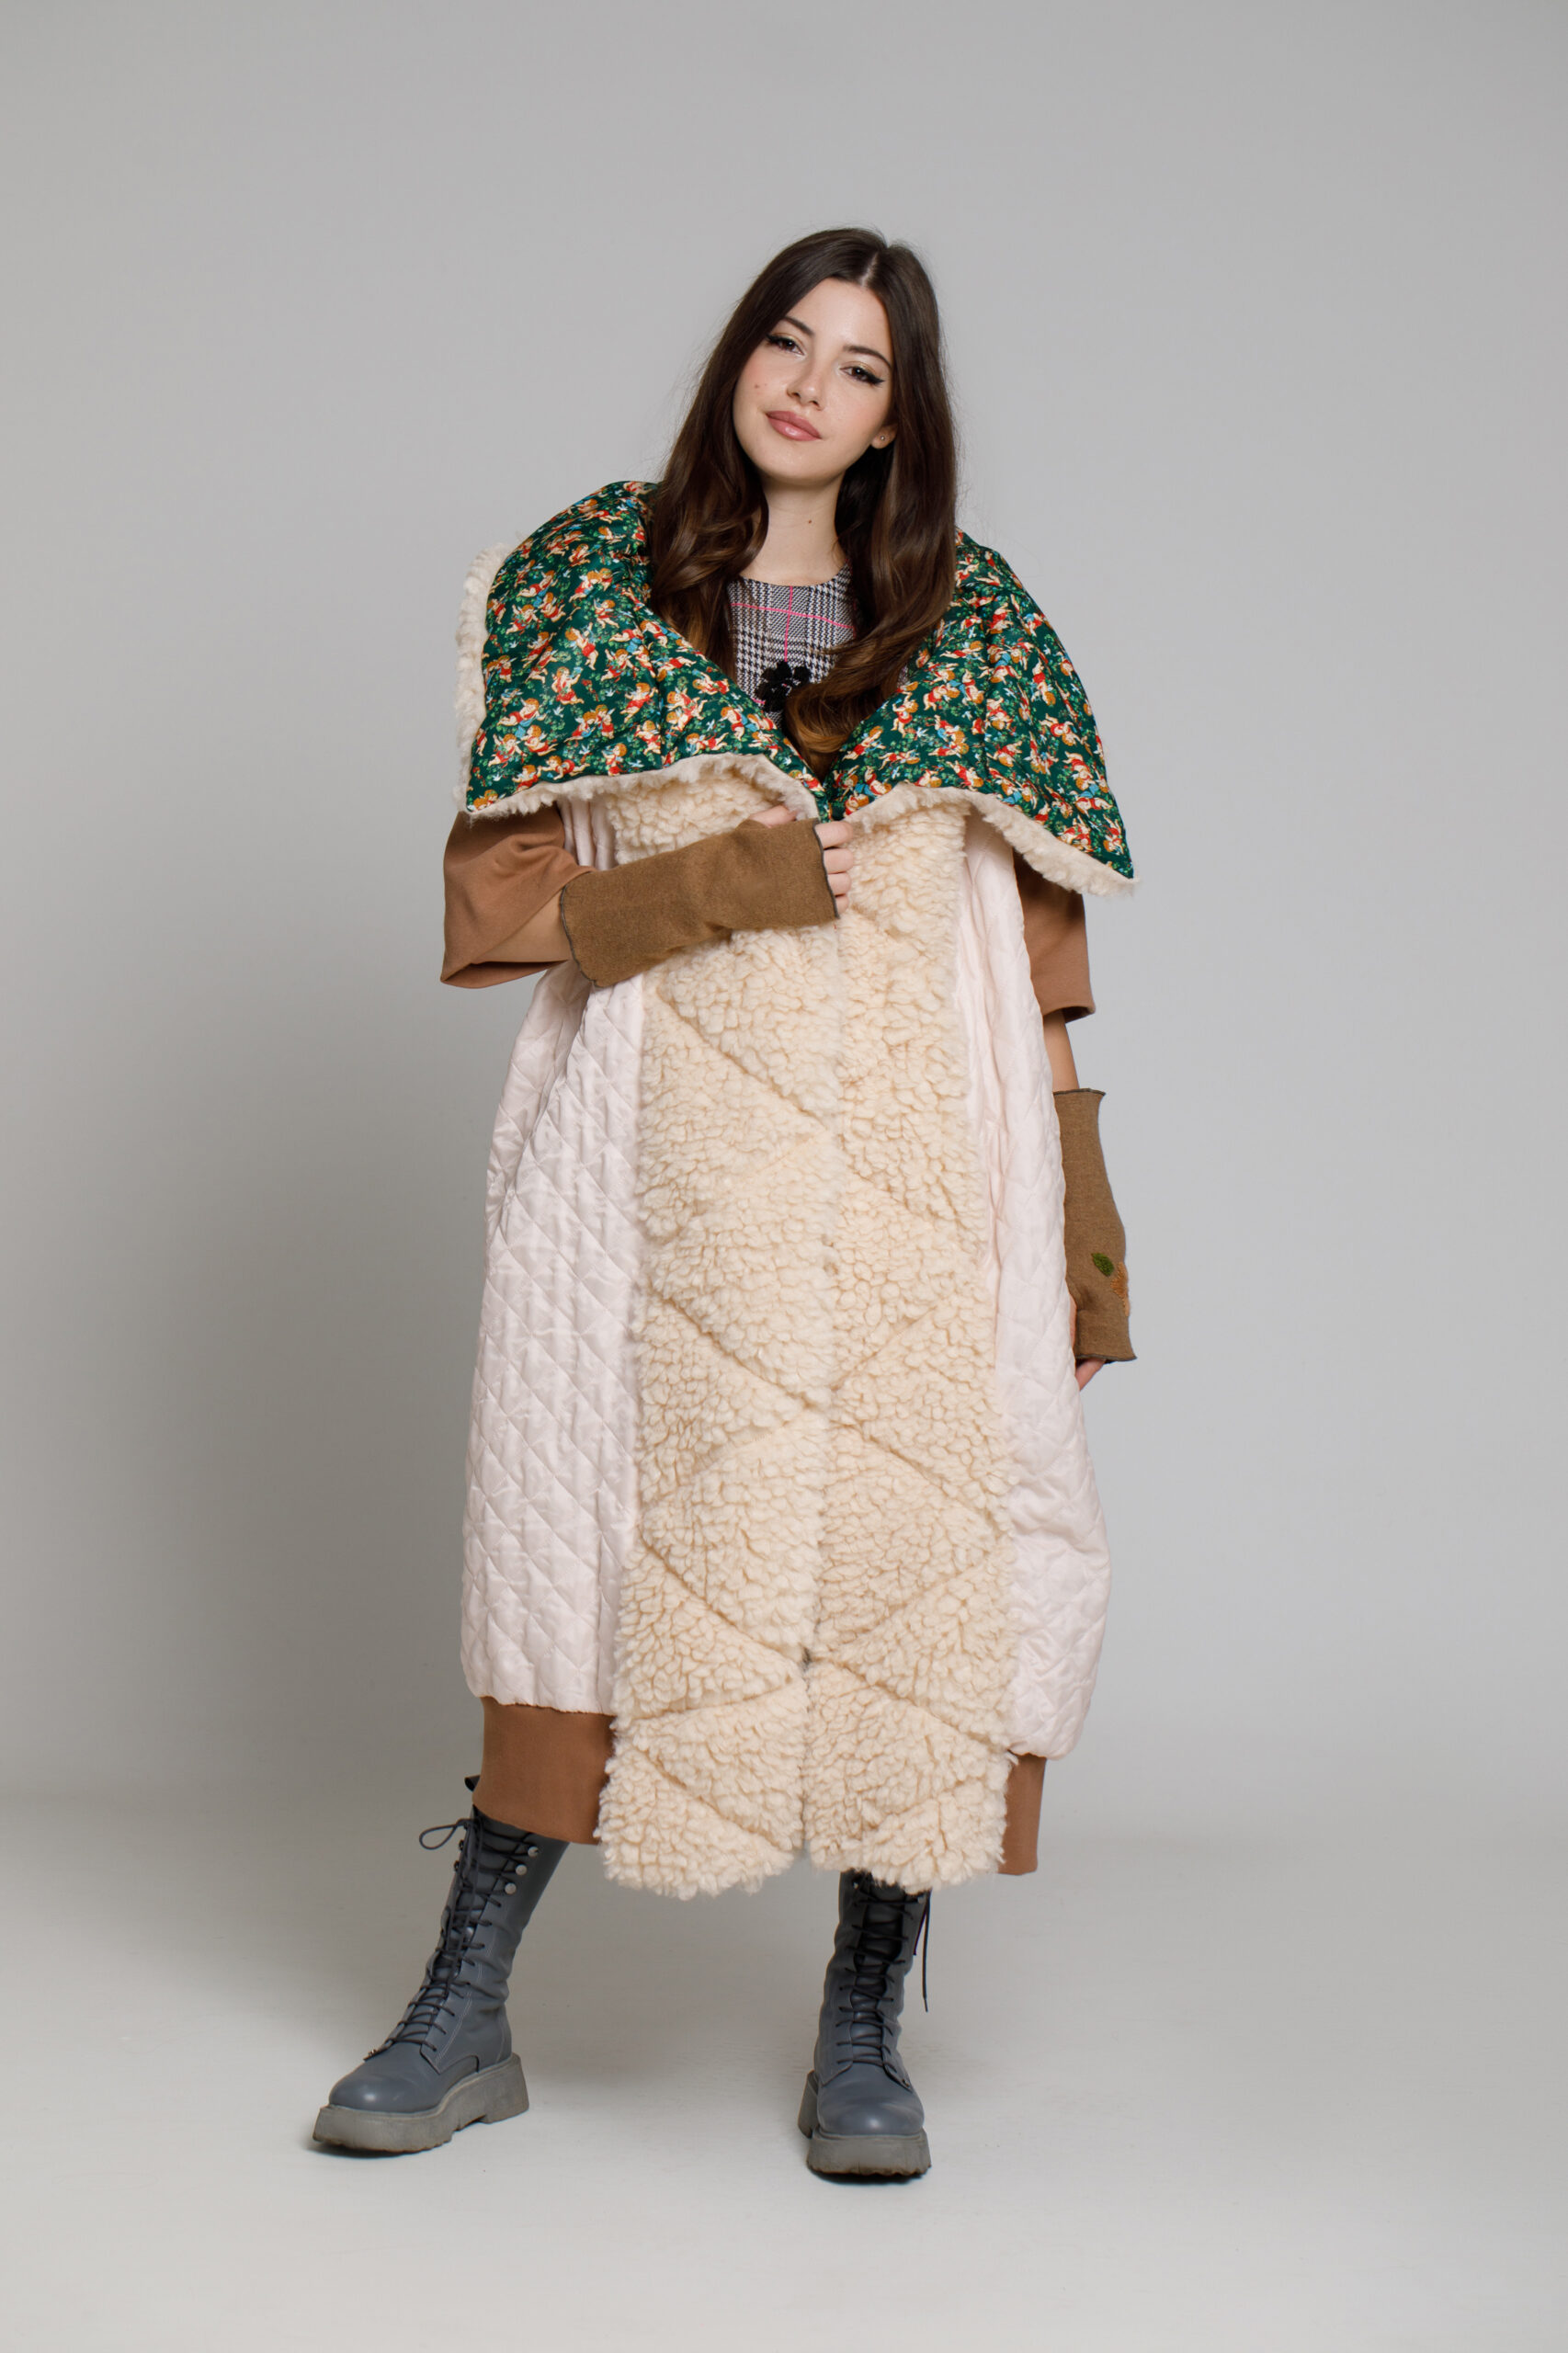 DOMA23 overcoat in printed and quilted green poplin. Natural fabrics, original design, handmade embroidery